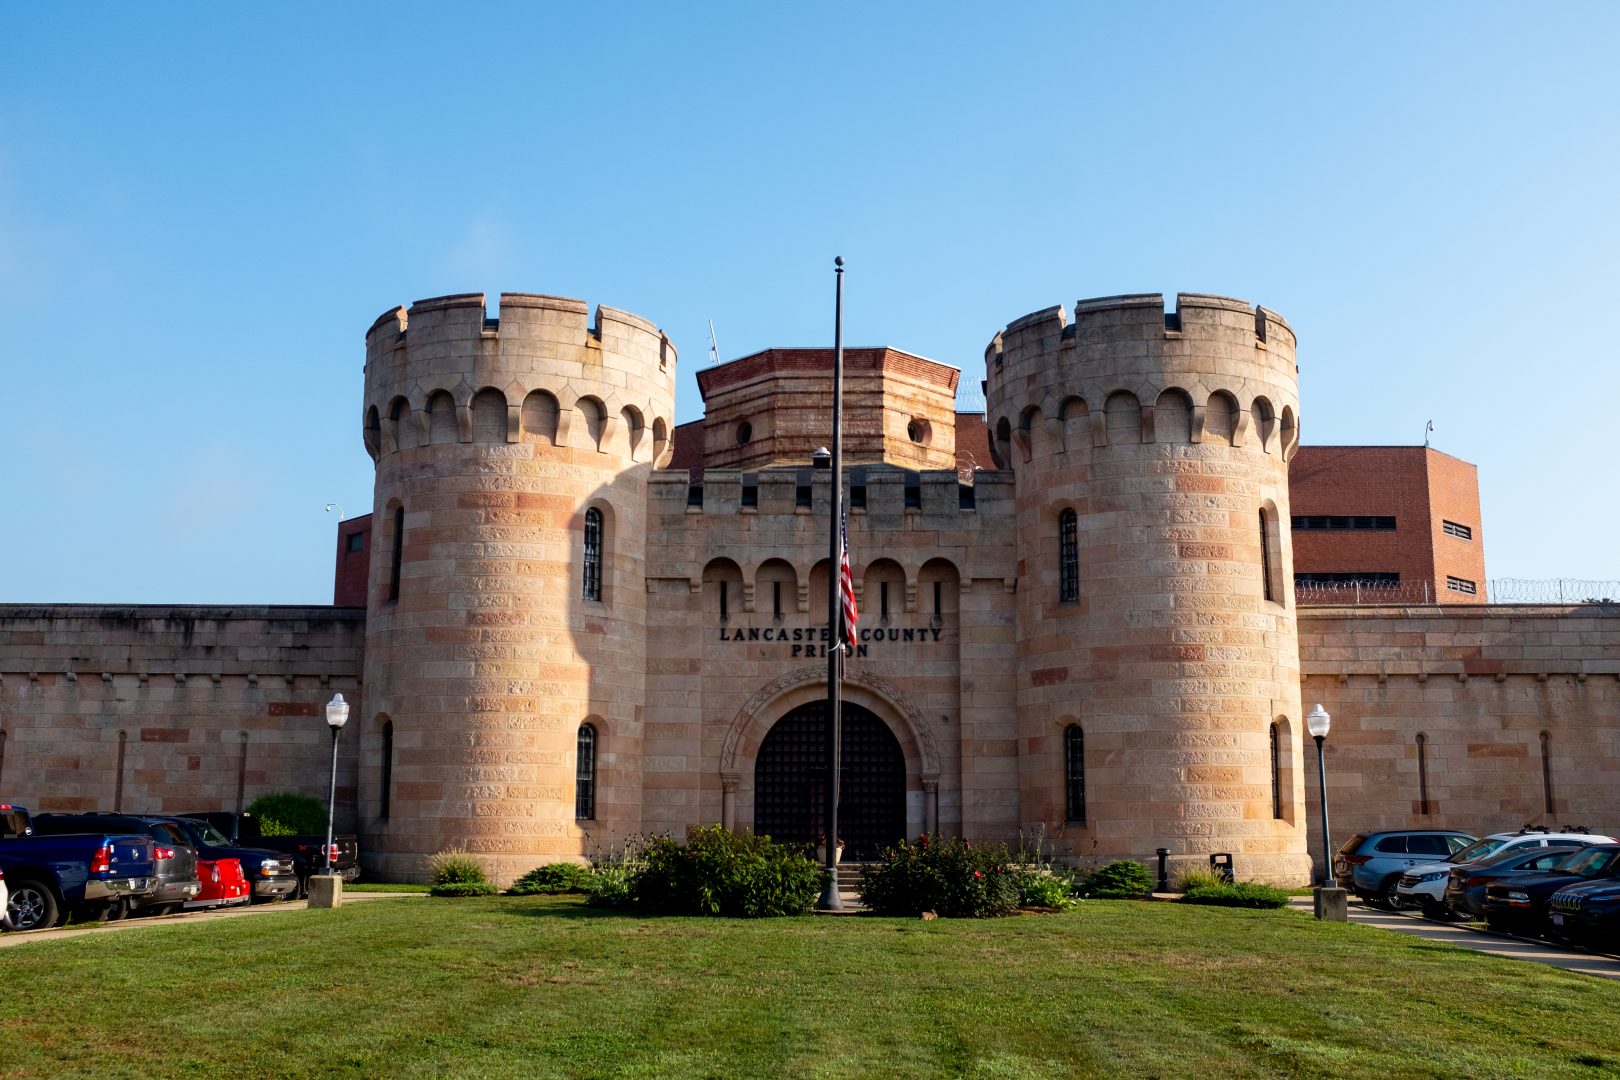 The Lancaster County Prison is seen in this photo taken Aug. 5, 2019.